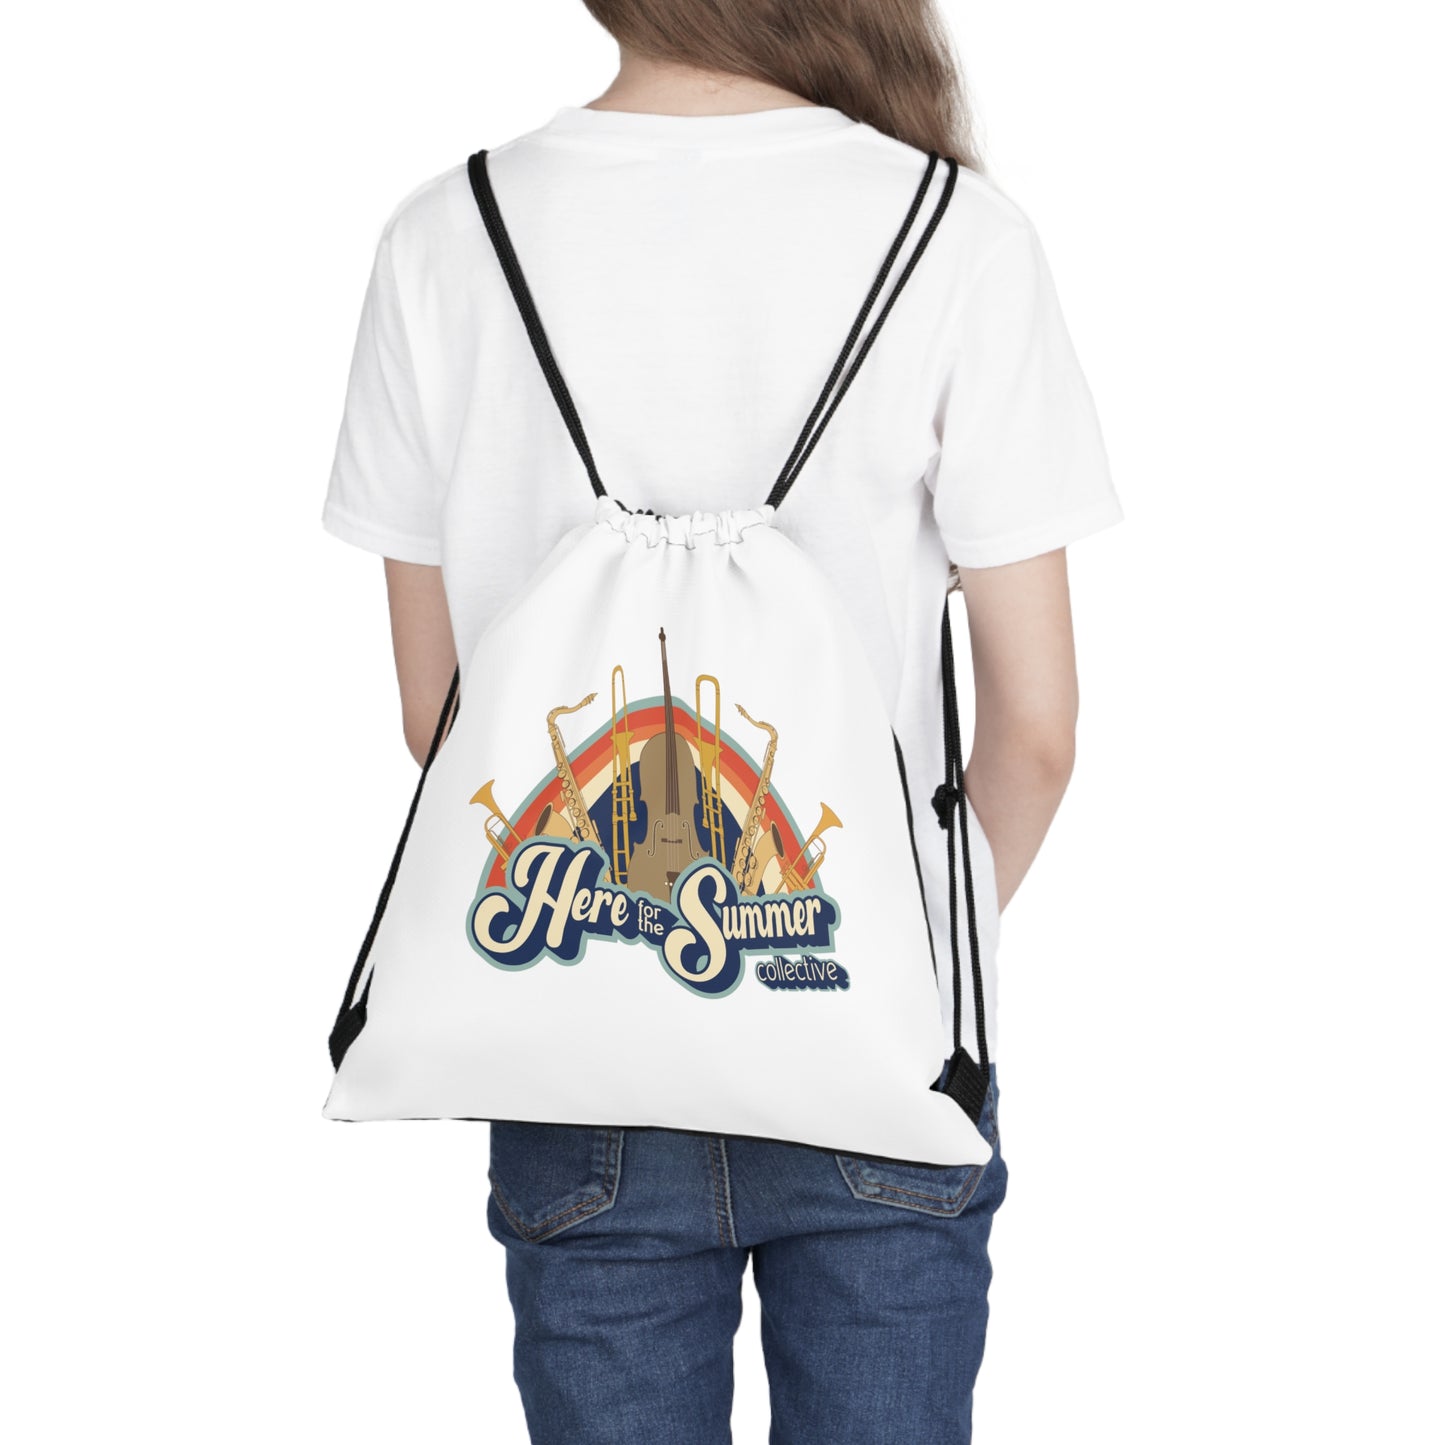 Here for the Summer Drawstring Bag